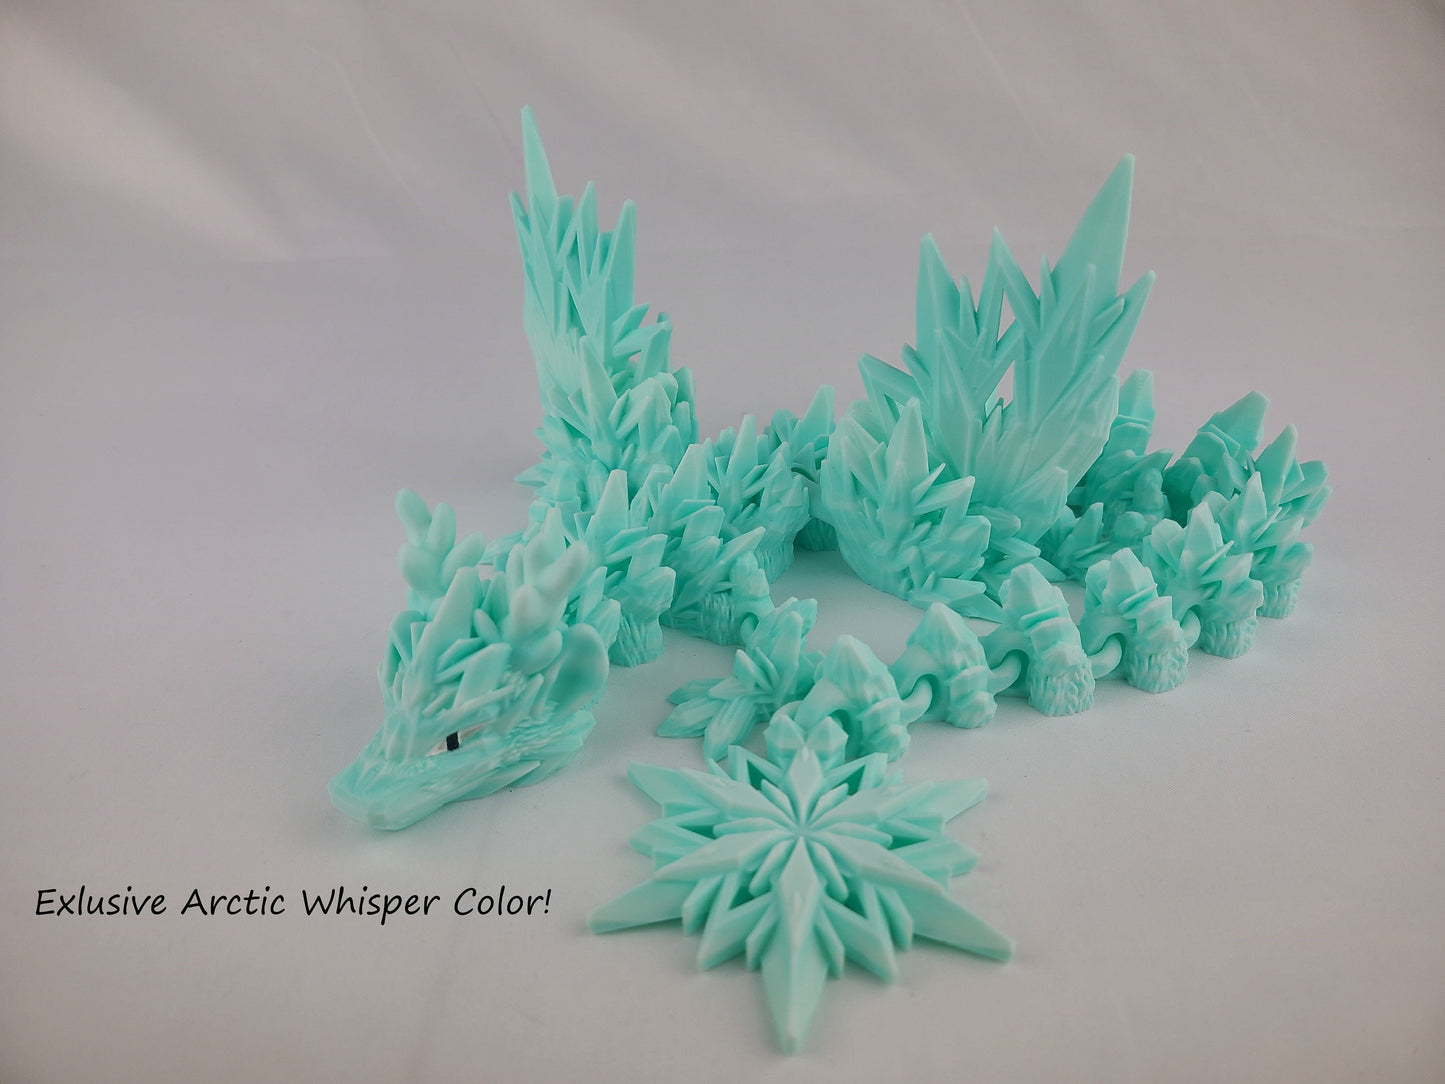 Winged Winter Dragon Articulated and 3d printed - Multicolor and free US shipping!